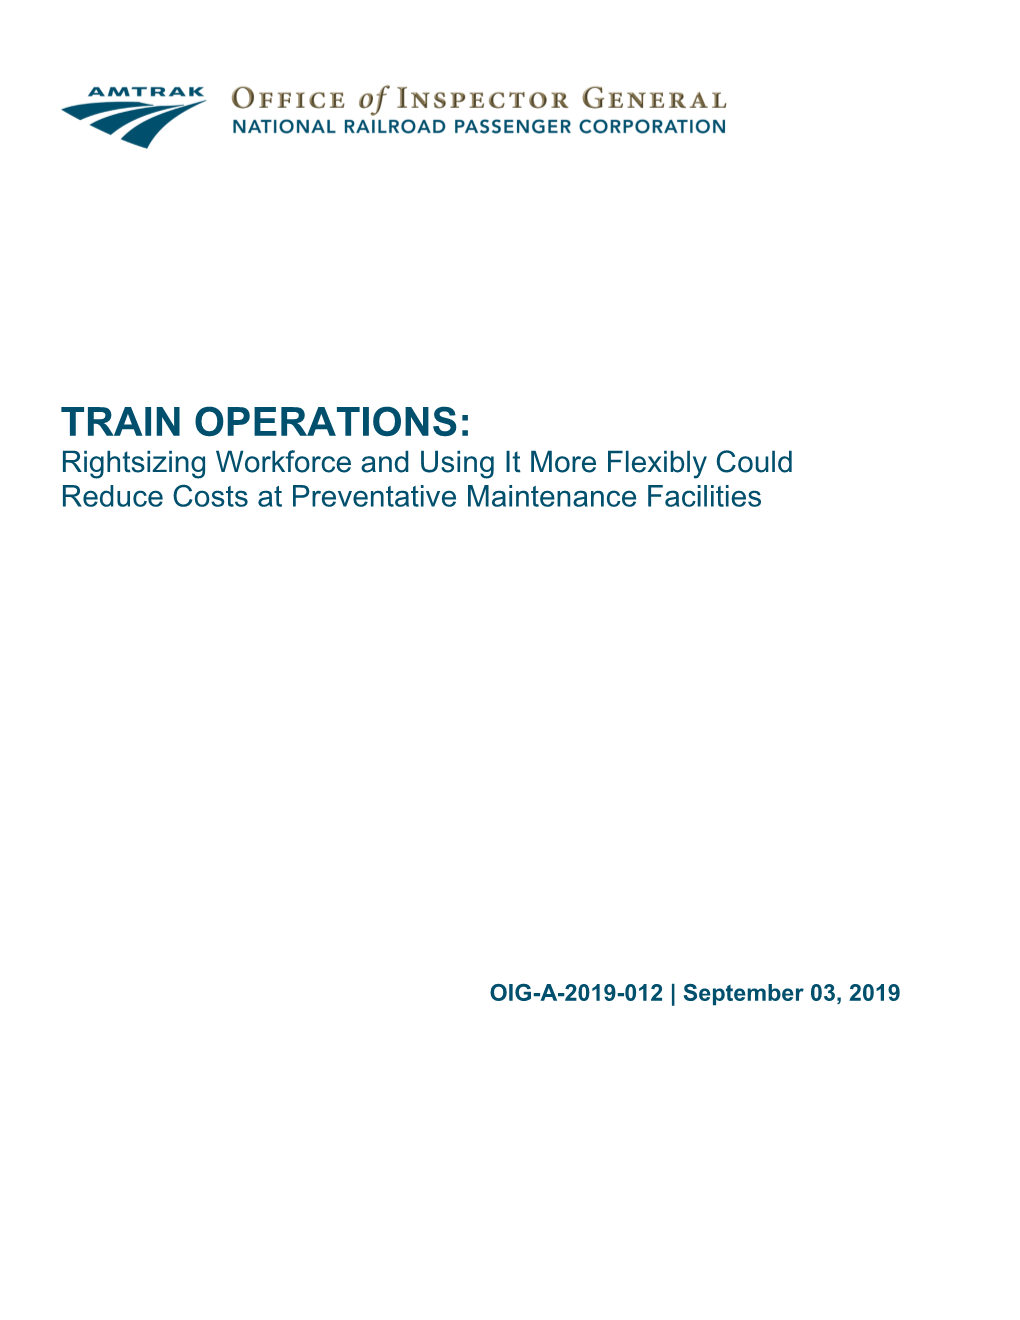 TRAIN OPERATIONS: Rightsizing Workforce and Using It More Flexibly Could Reduce Costs at Preventative Maintenance Facilities